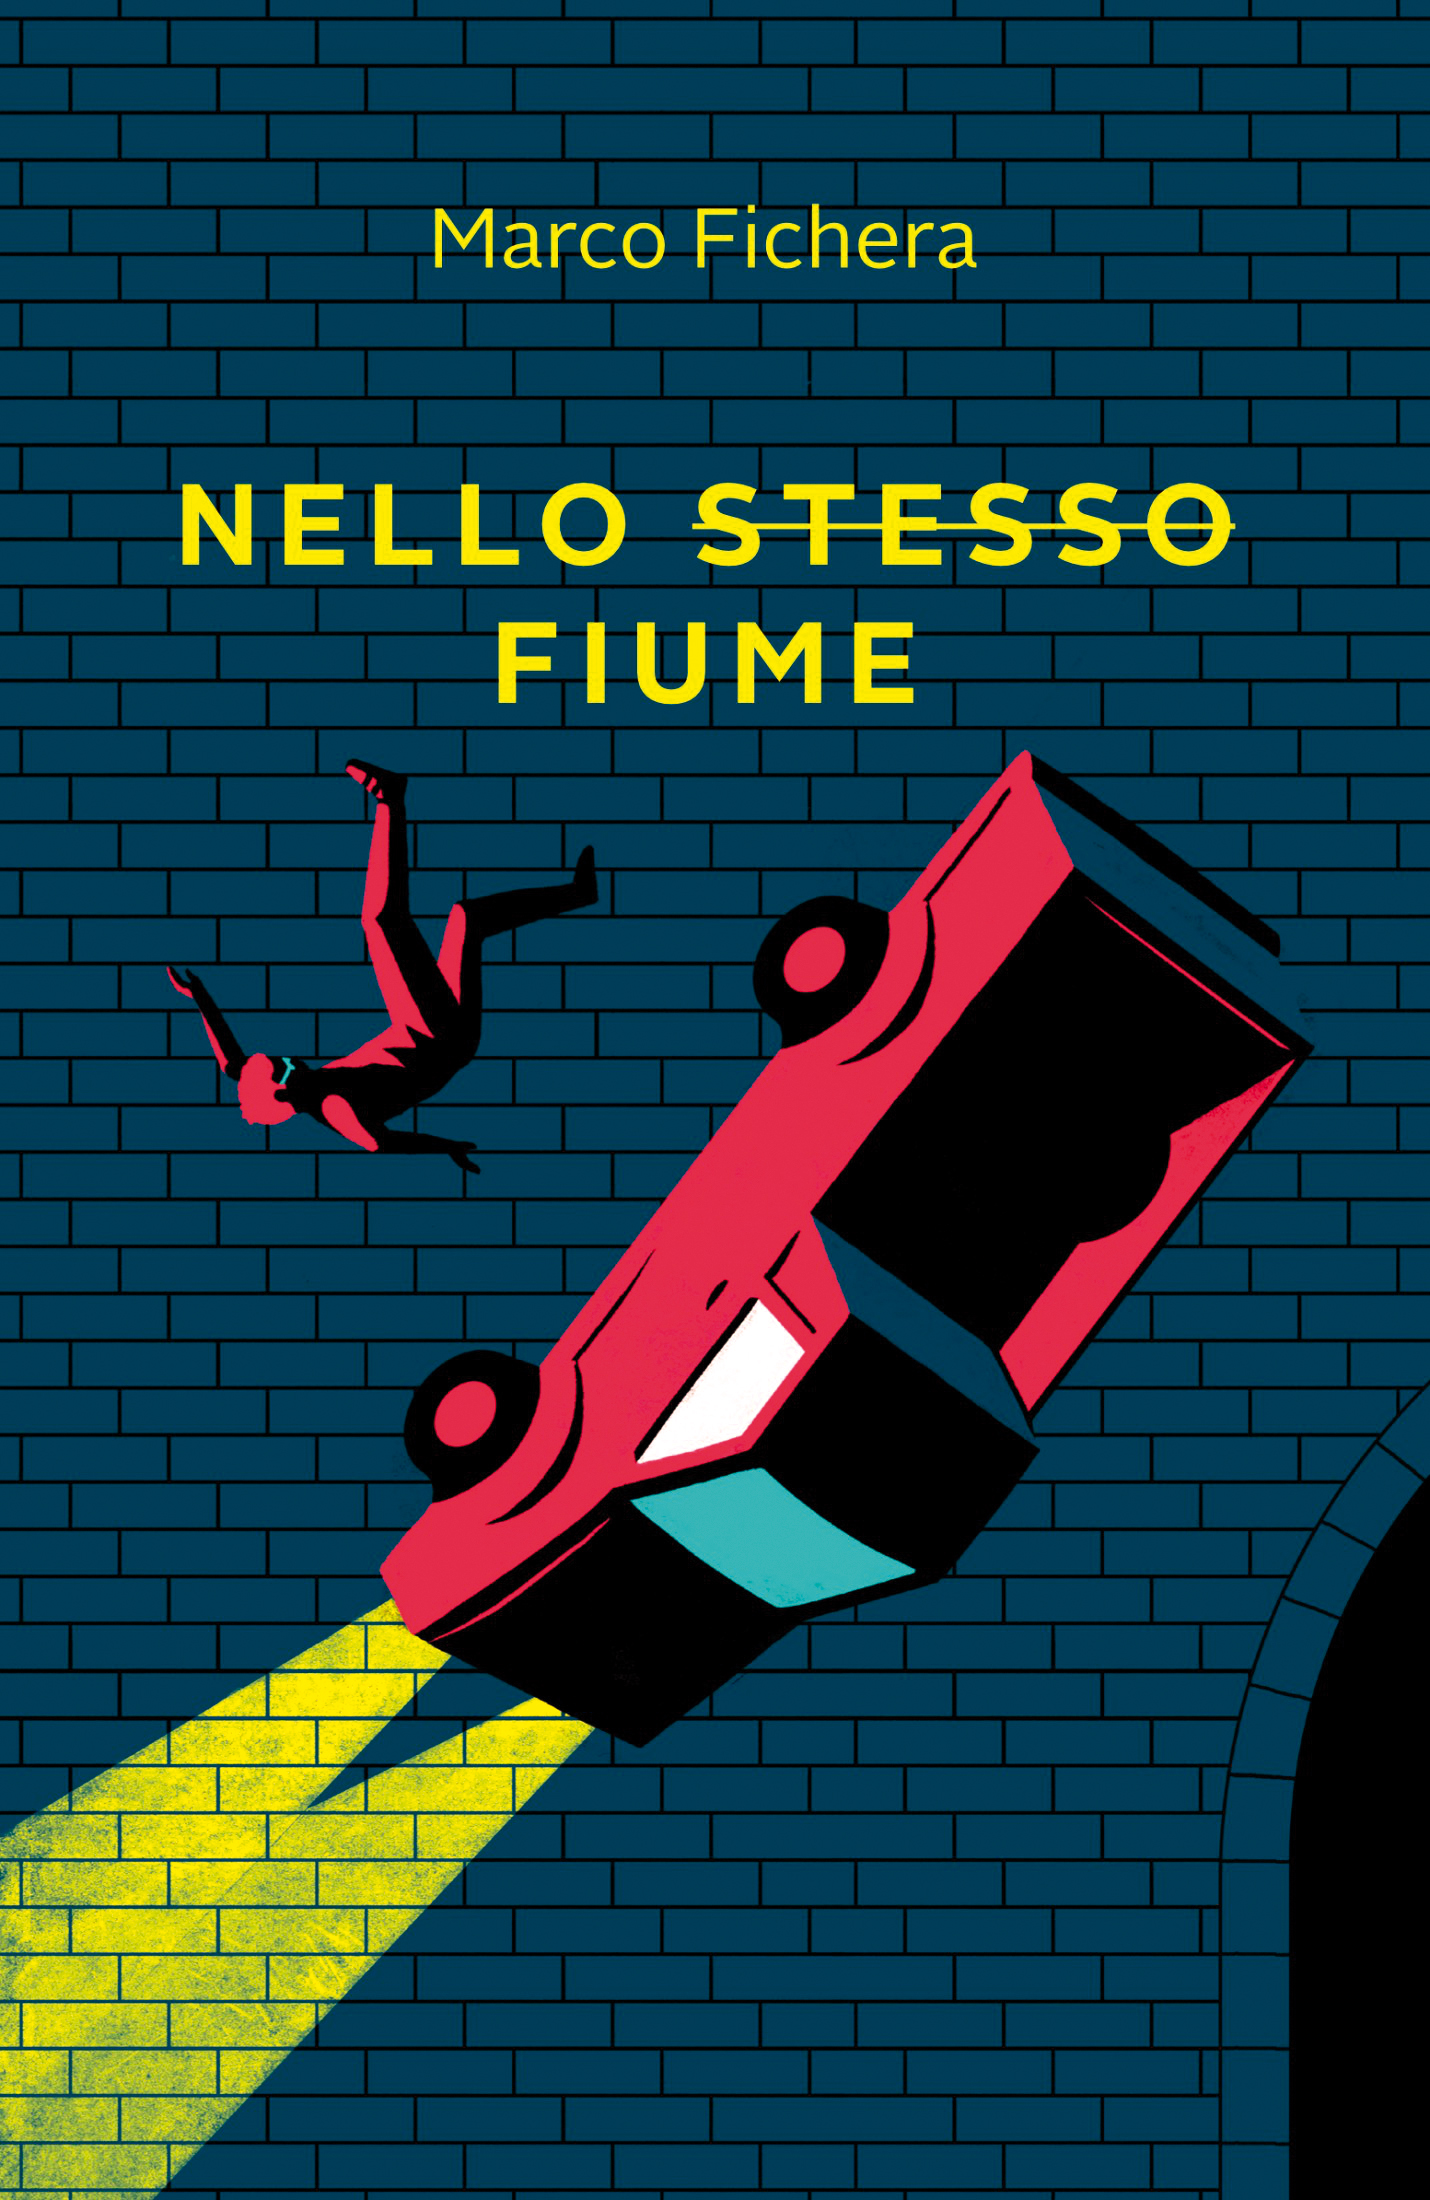 Nello Stesso Fiume (Italian language, 2020, Independently Published)